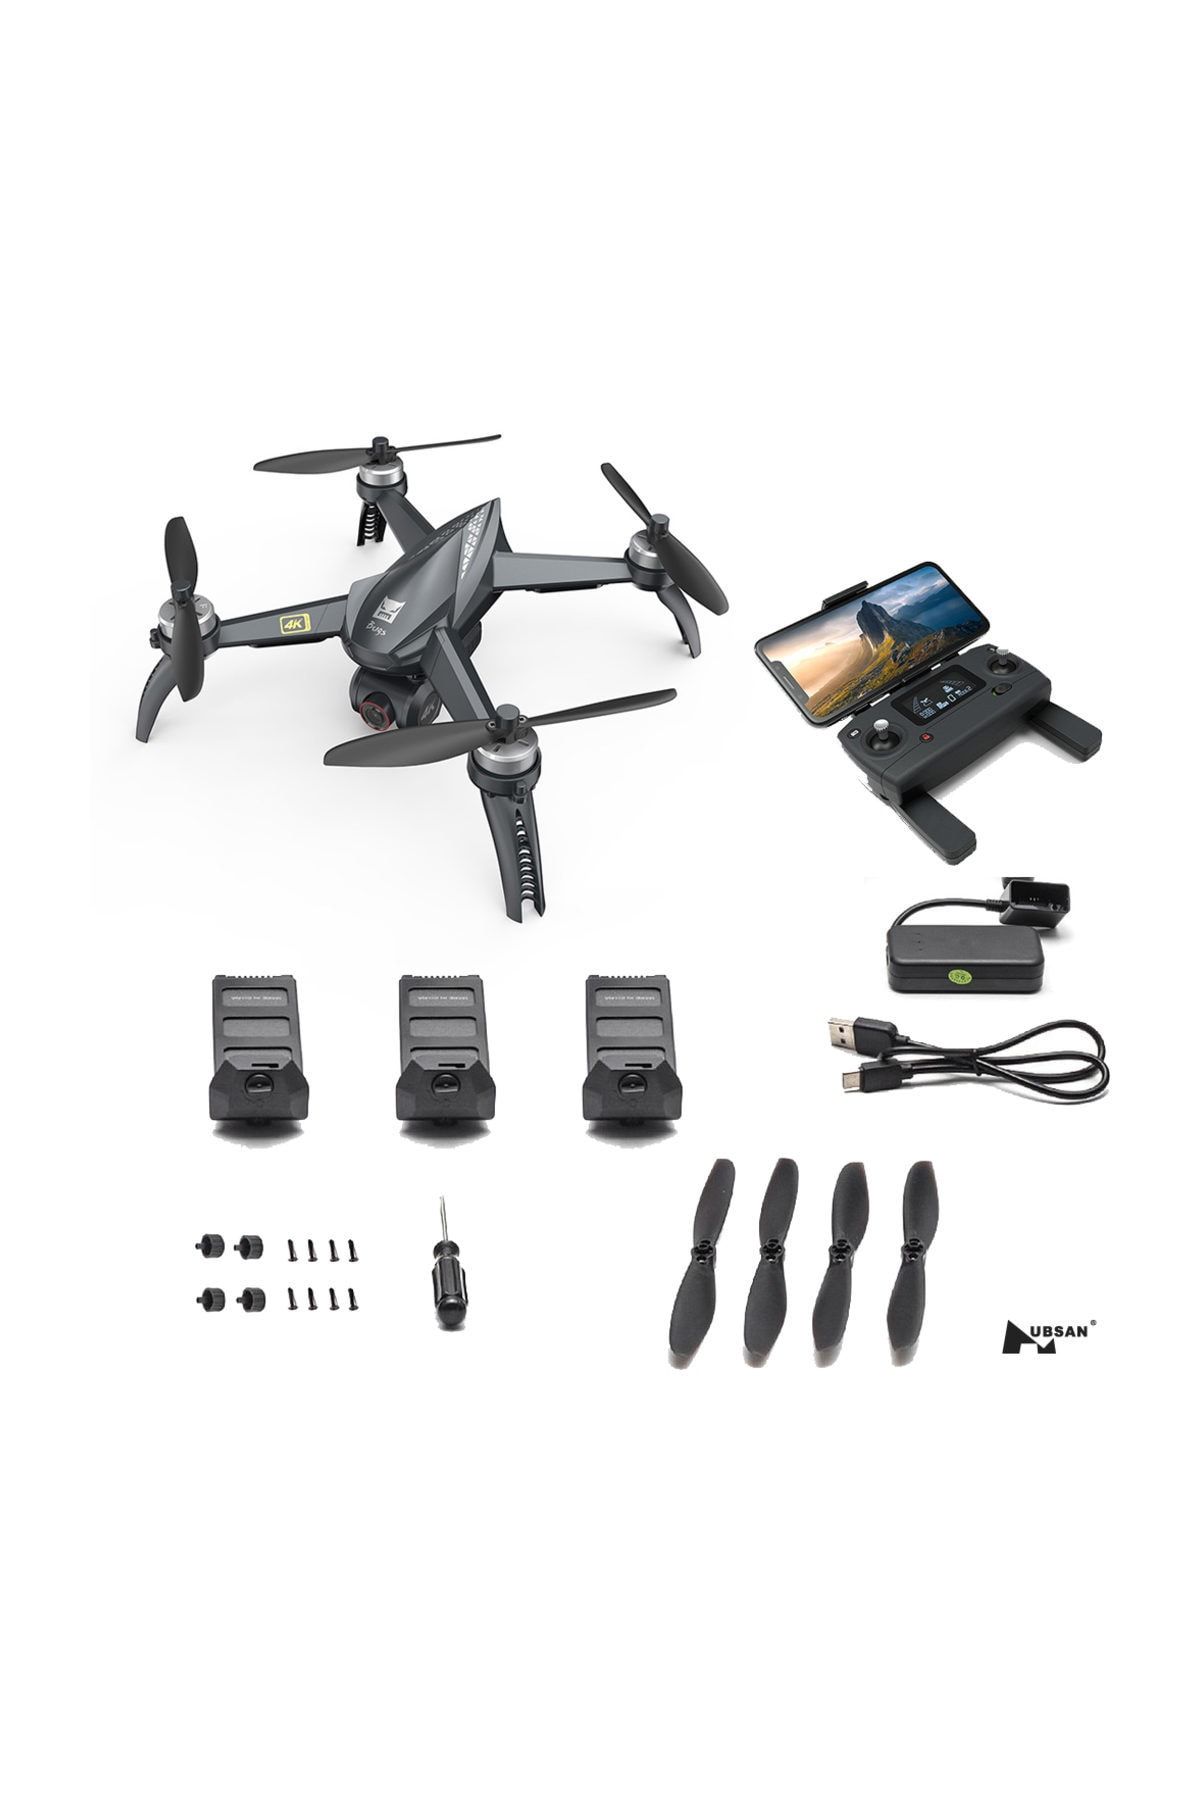 Aden MJX Bugs 5W Fly More Combo Drone